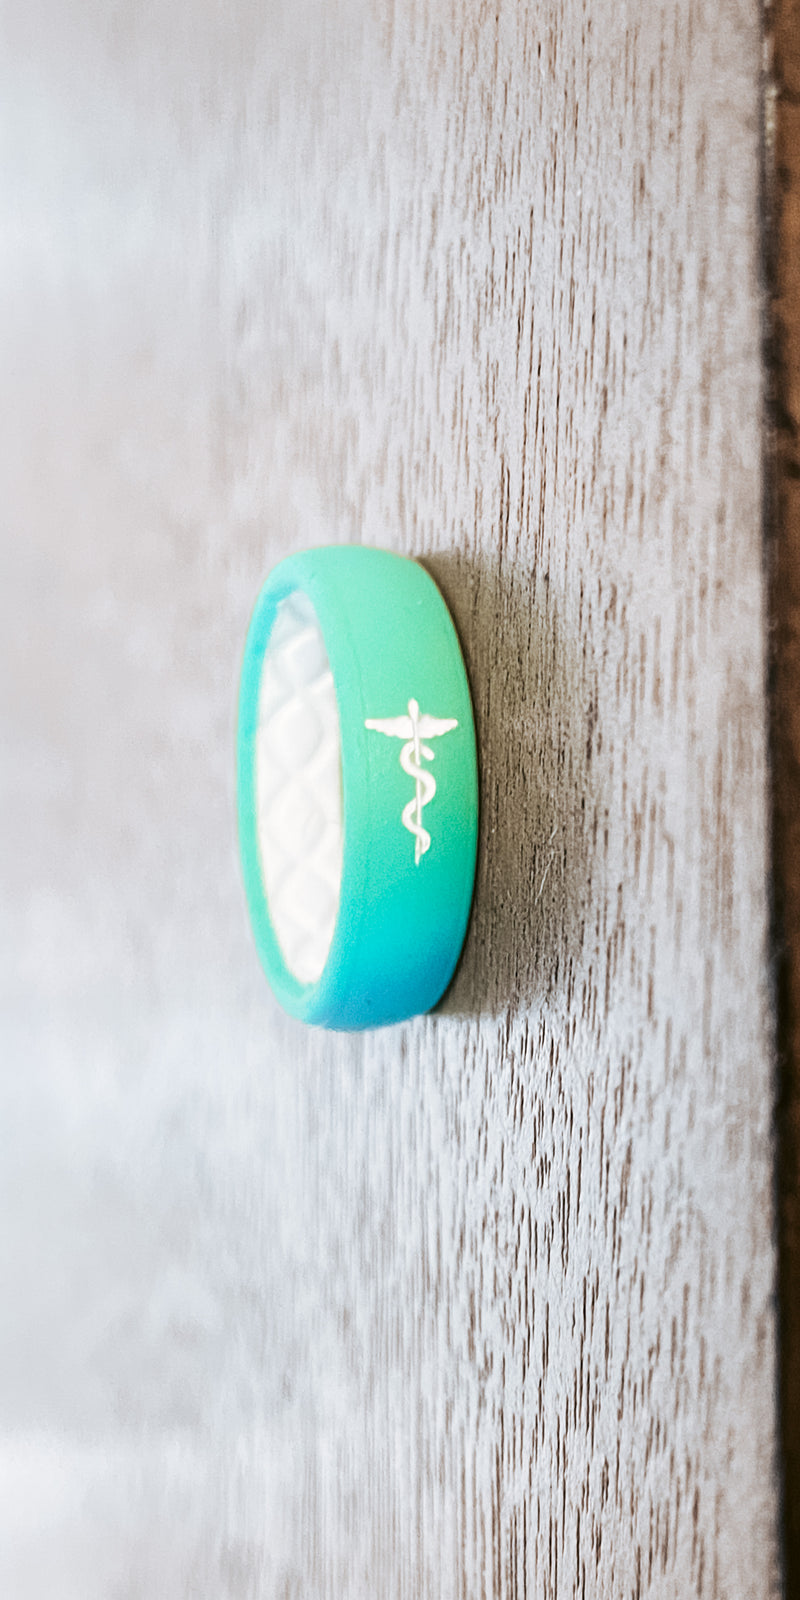 Teal w/ Healthcare Ring